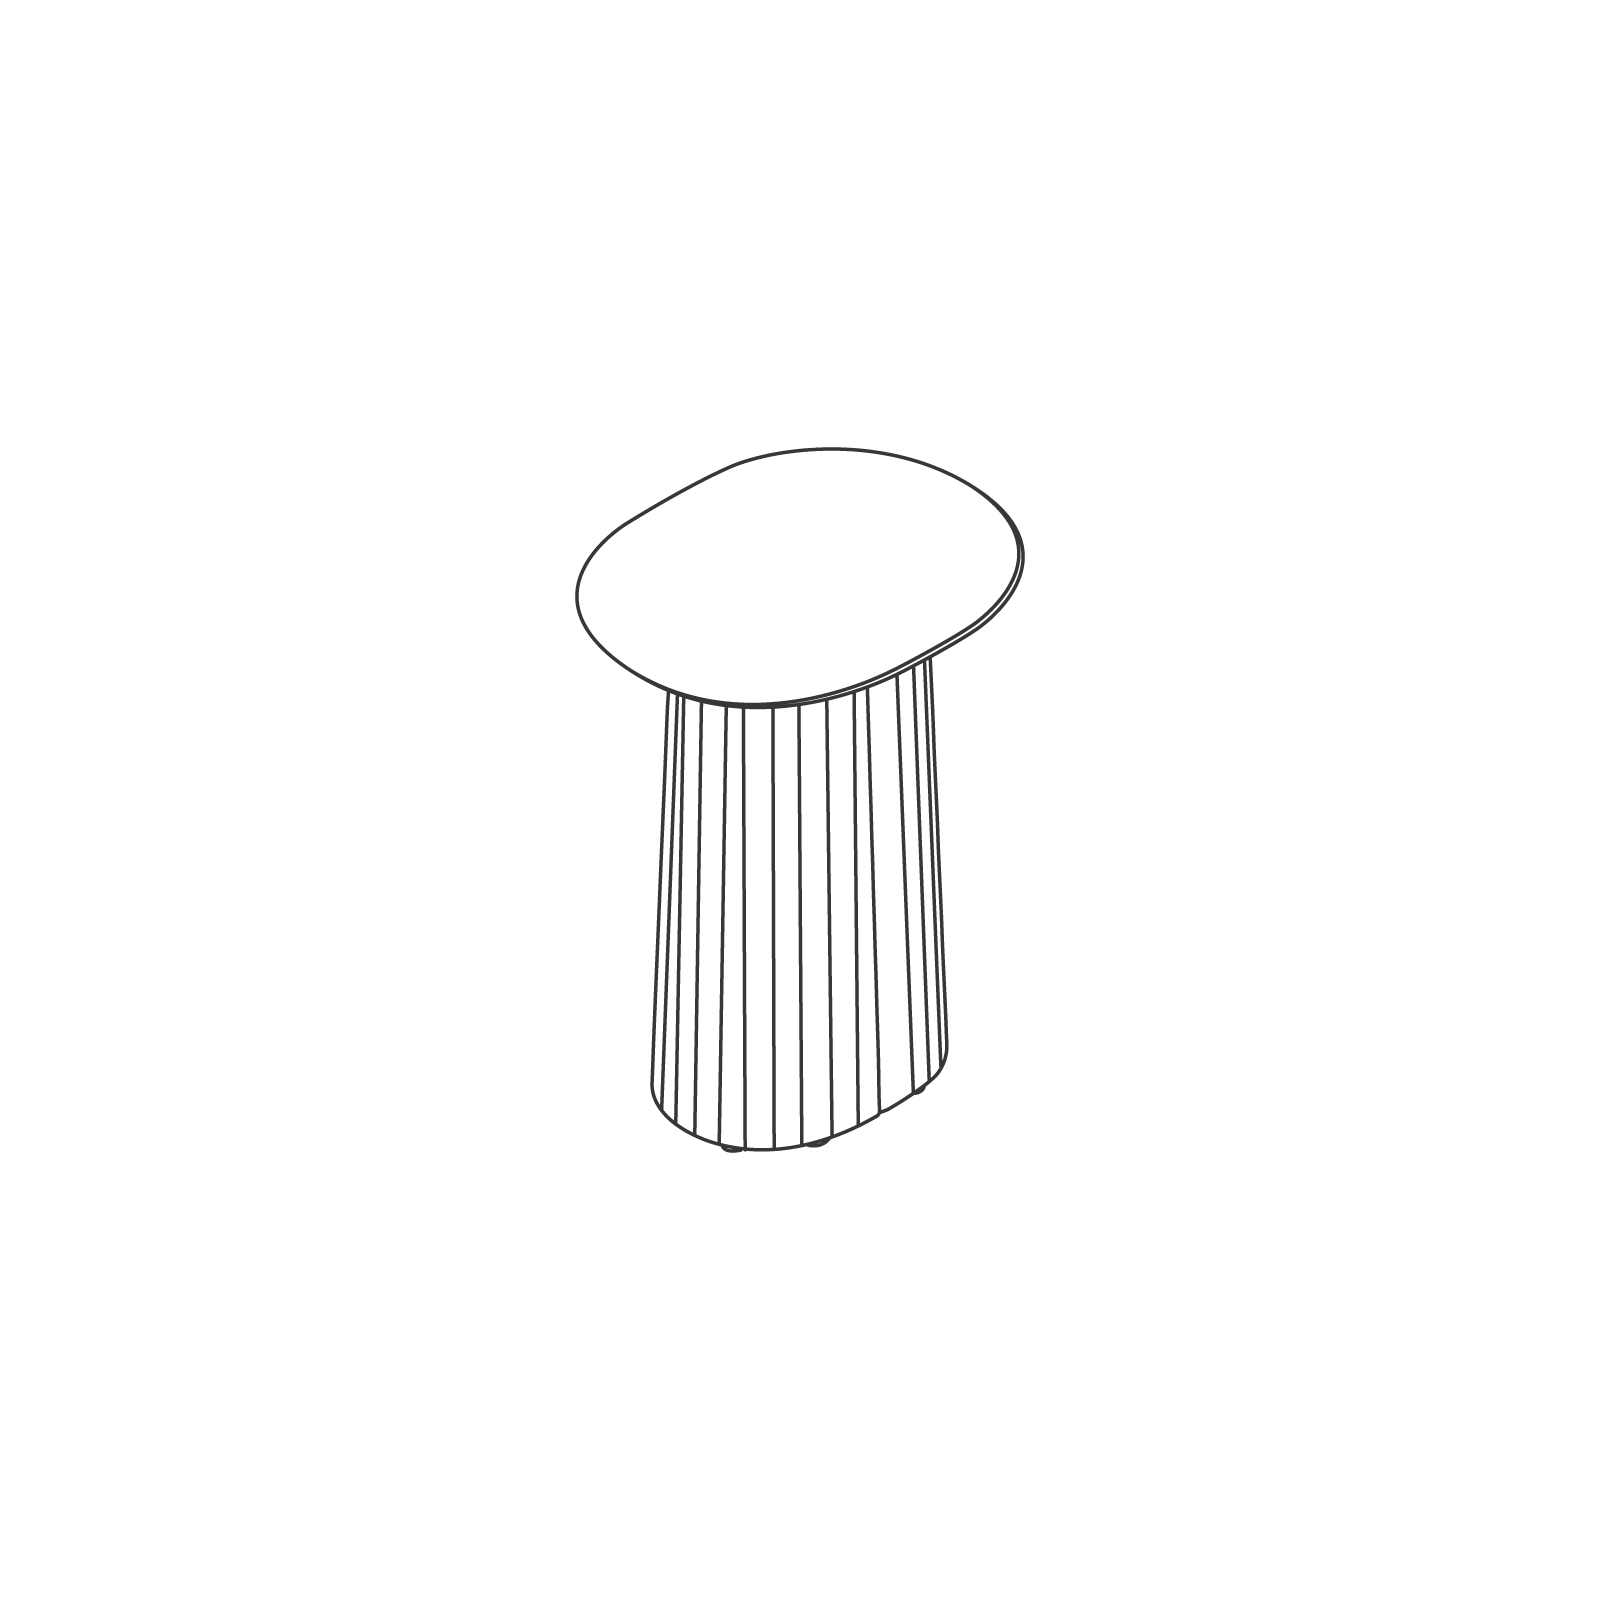 A line drawing - Tun Side Table–Steel Base